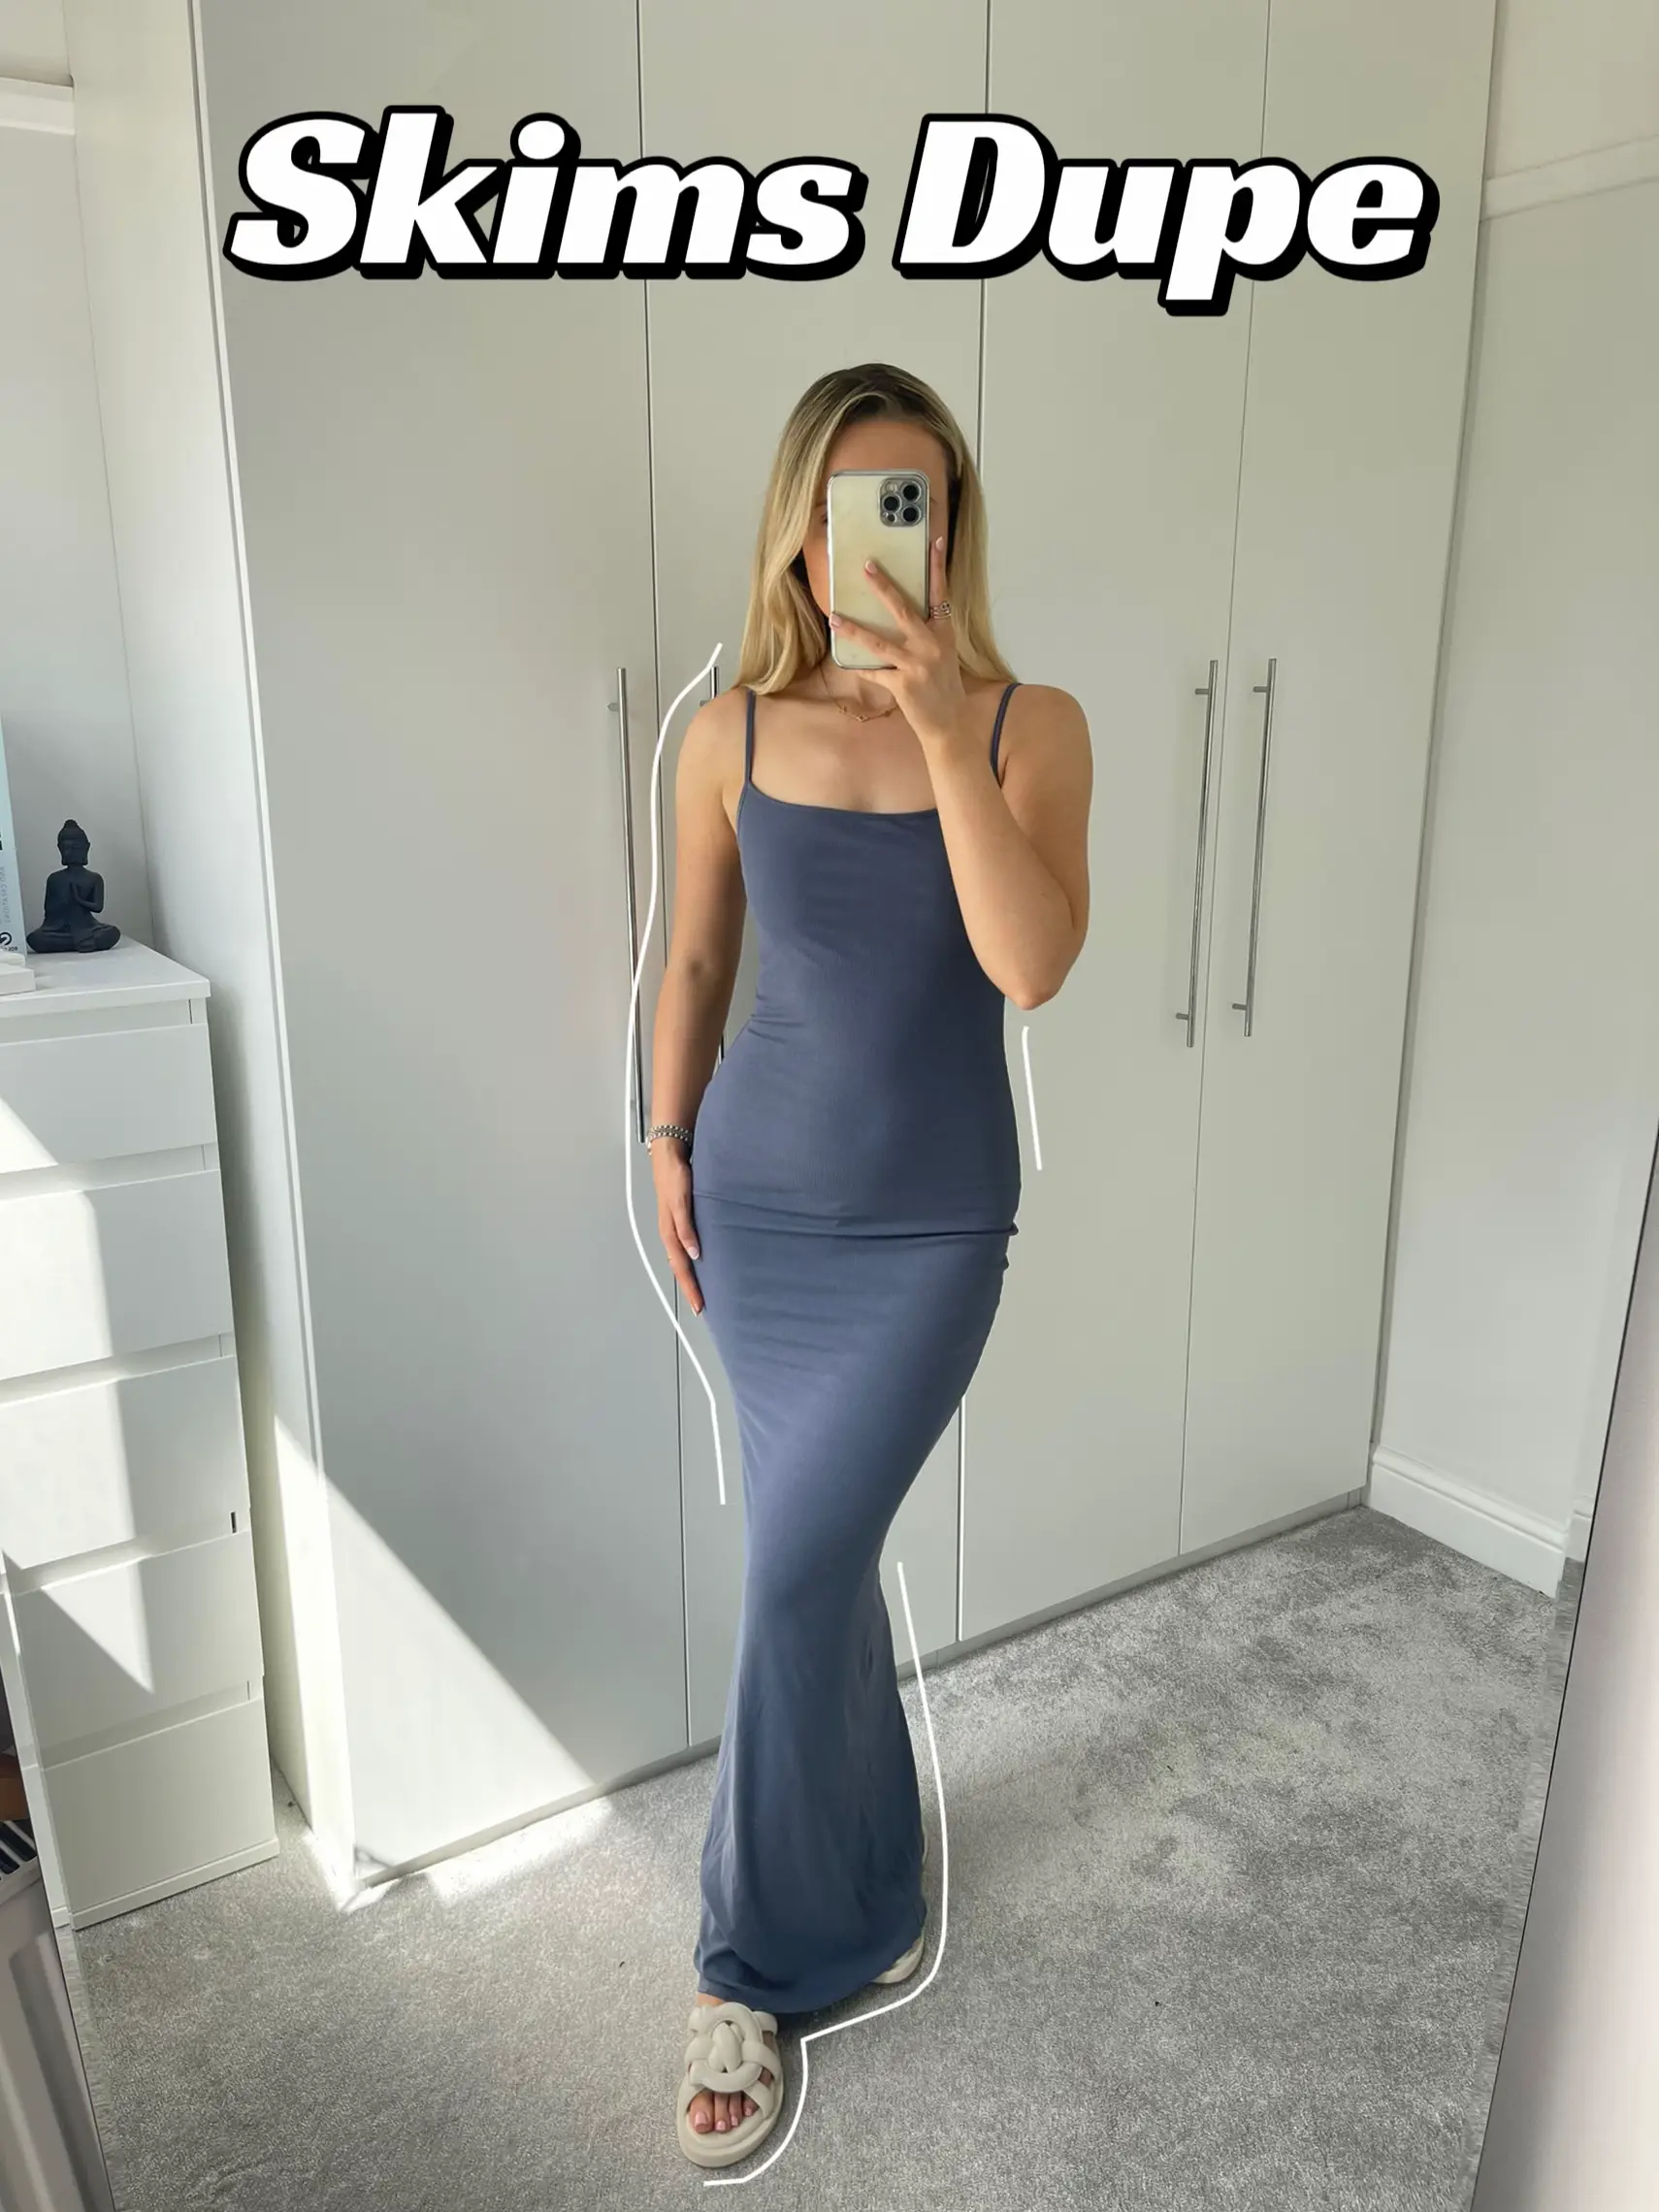 I'm a fashion fan - I found an incredible dupe for Kim's SKIMS